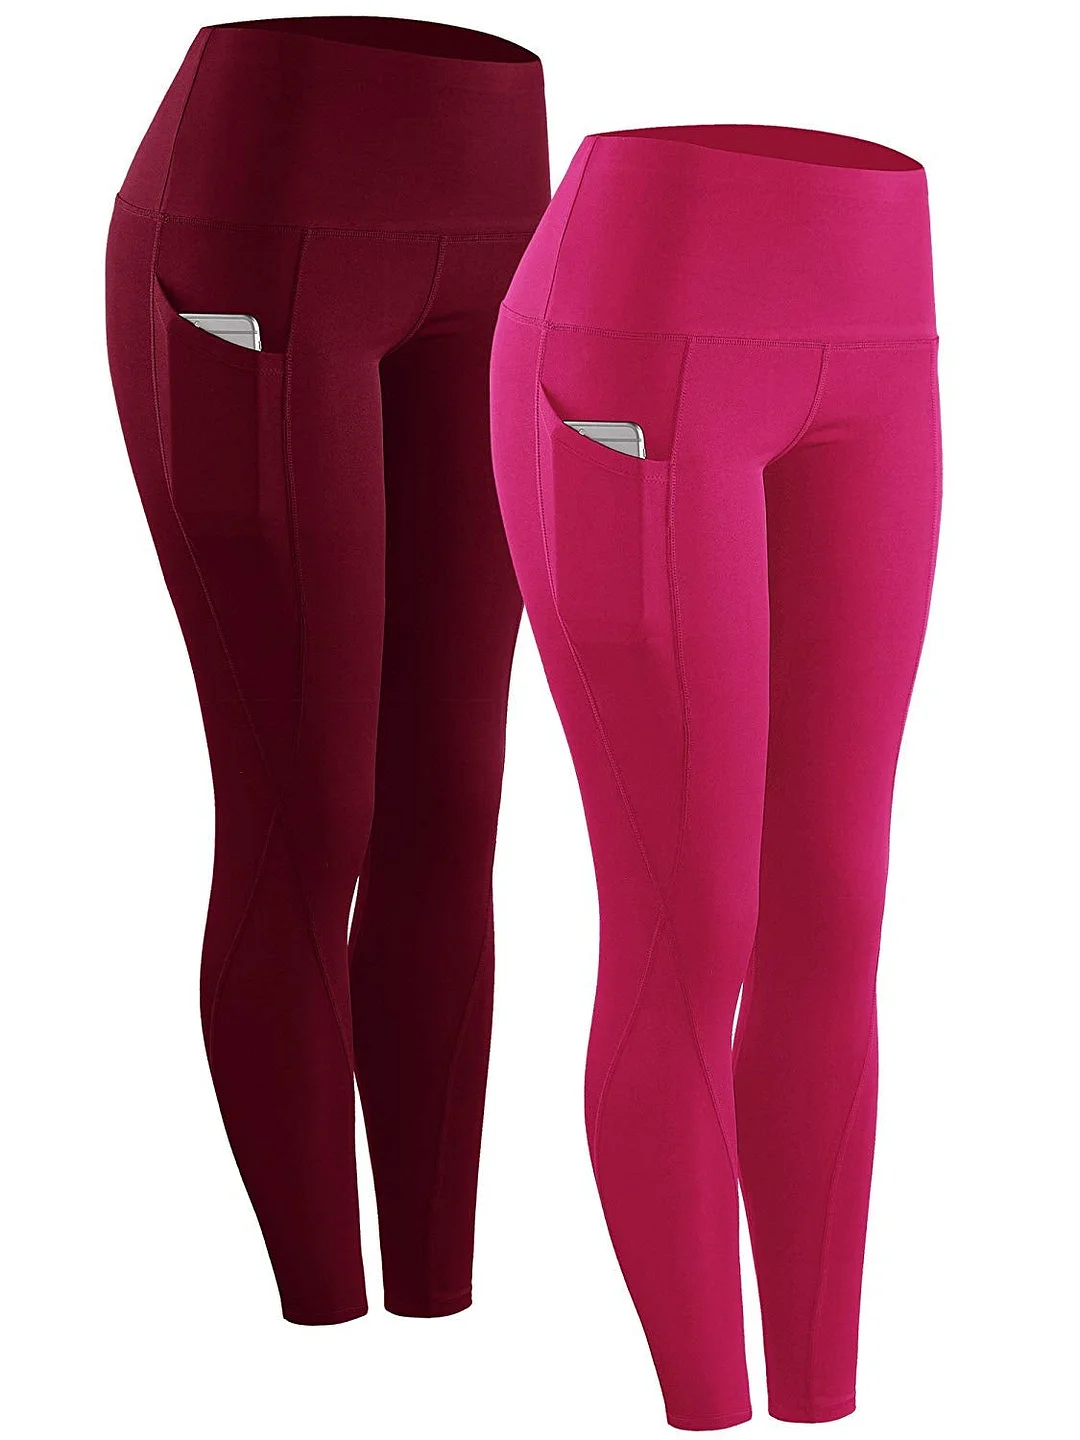 High Waist Running Workout Leggings for Yoga with Pockets